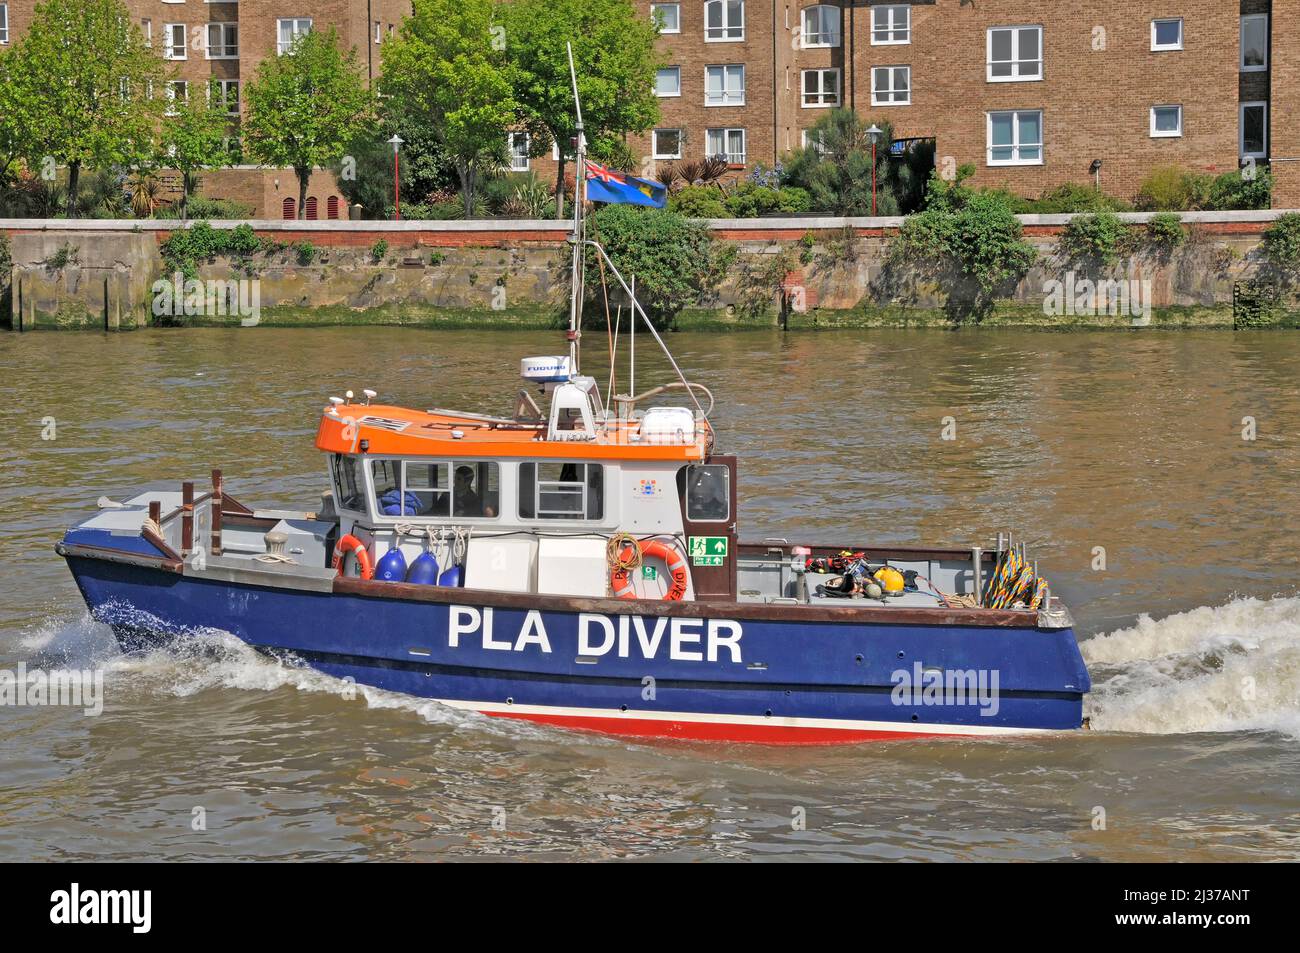 Port of London PLA Marine Services fully equipped support boat 'PLA Diver' at speed used by divers on varied underwater work River Thames England UK Stock Photo